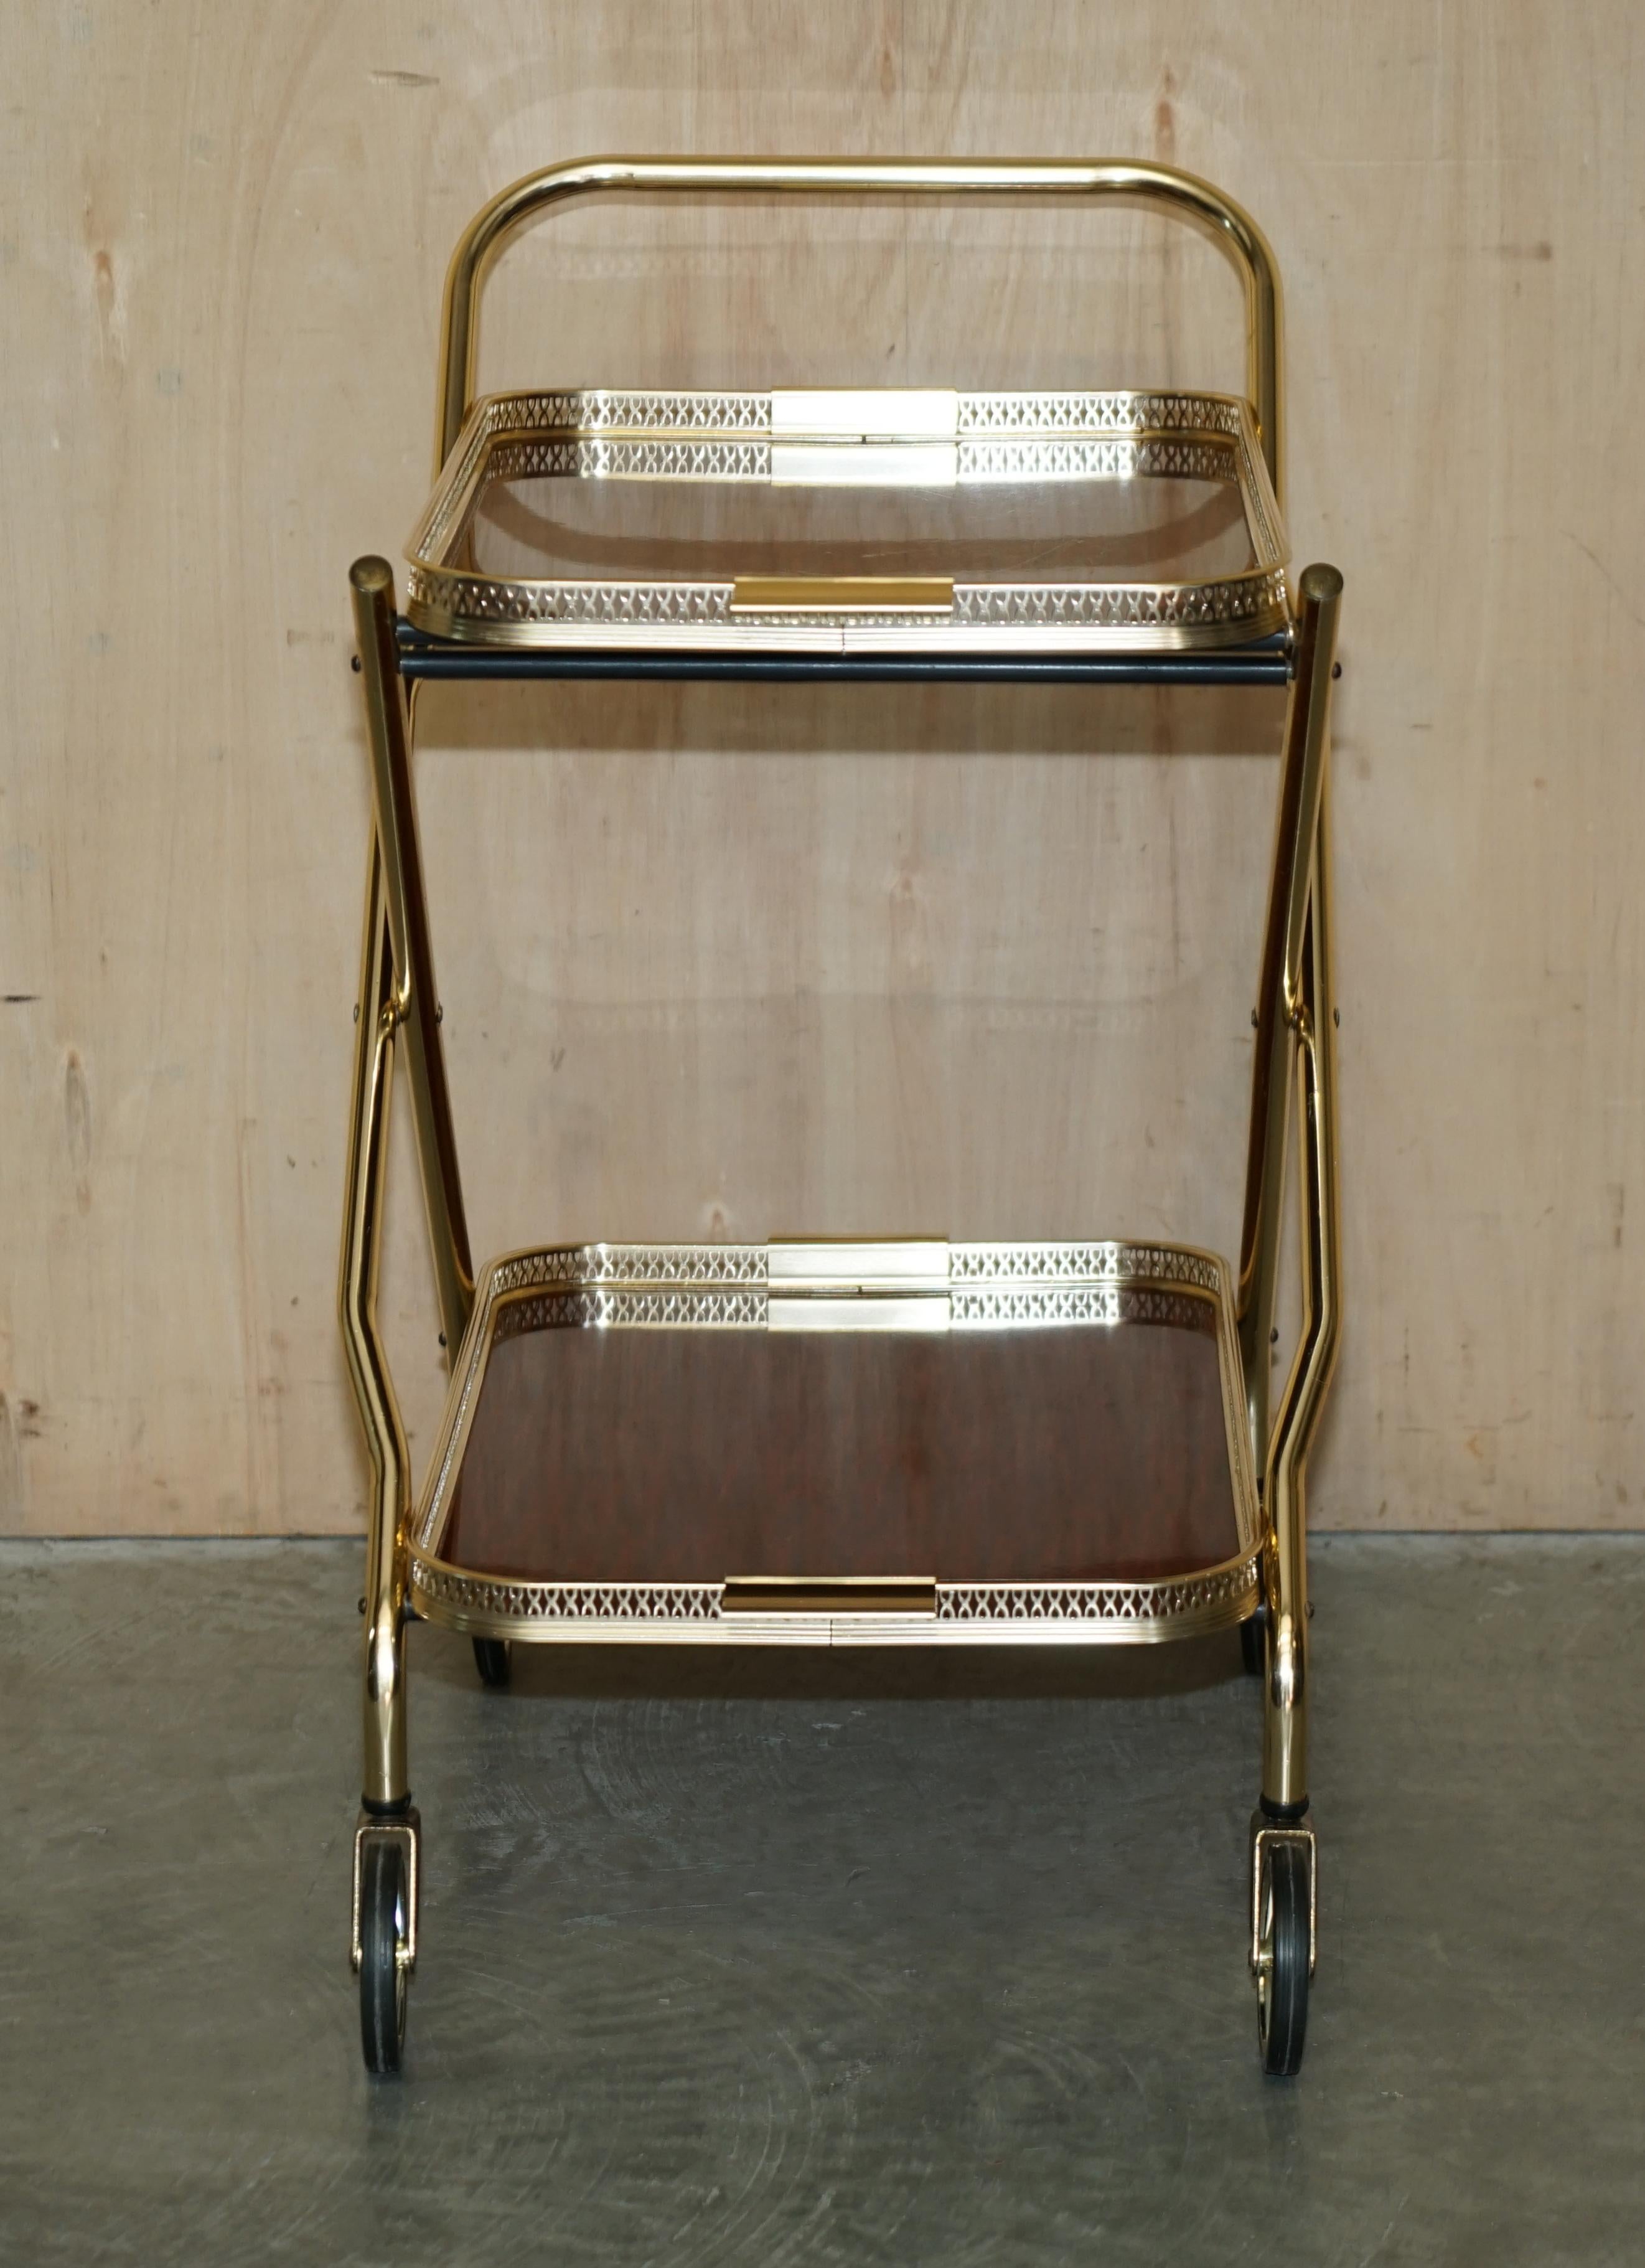 Midcentury Folding Hardwood Brass 1950s Drinks Trolley with Removable Trays For Sale 9